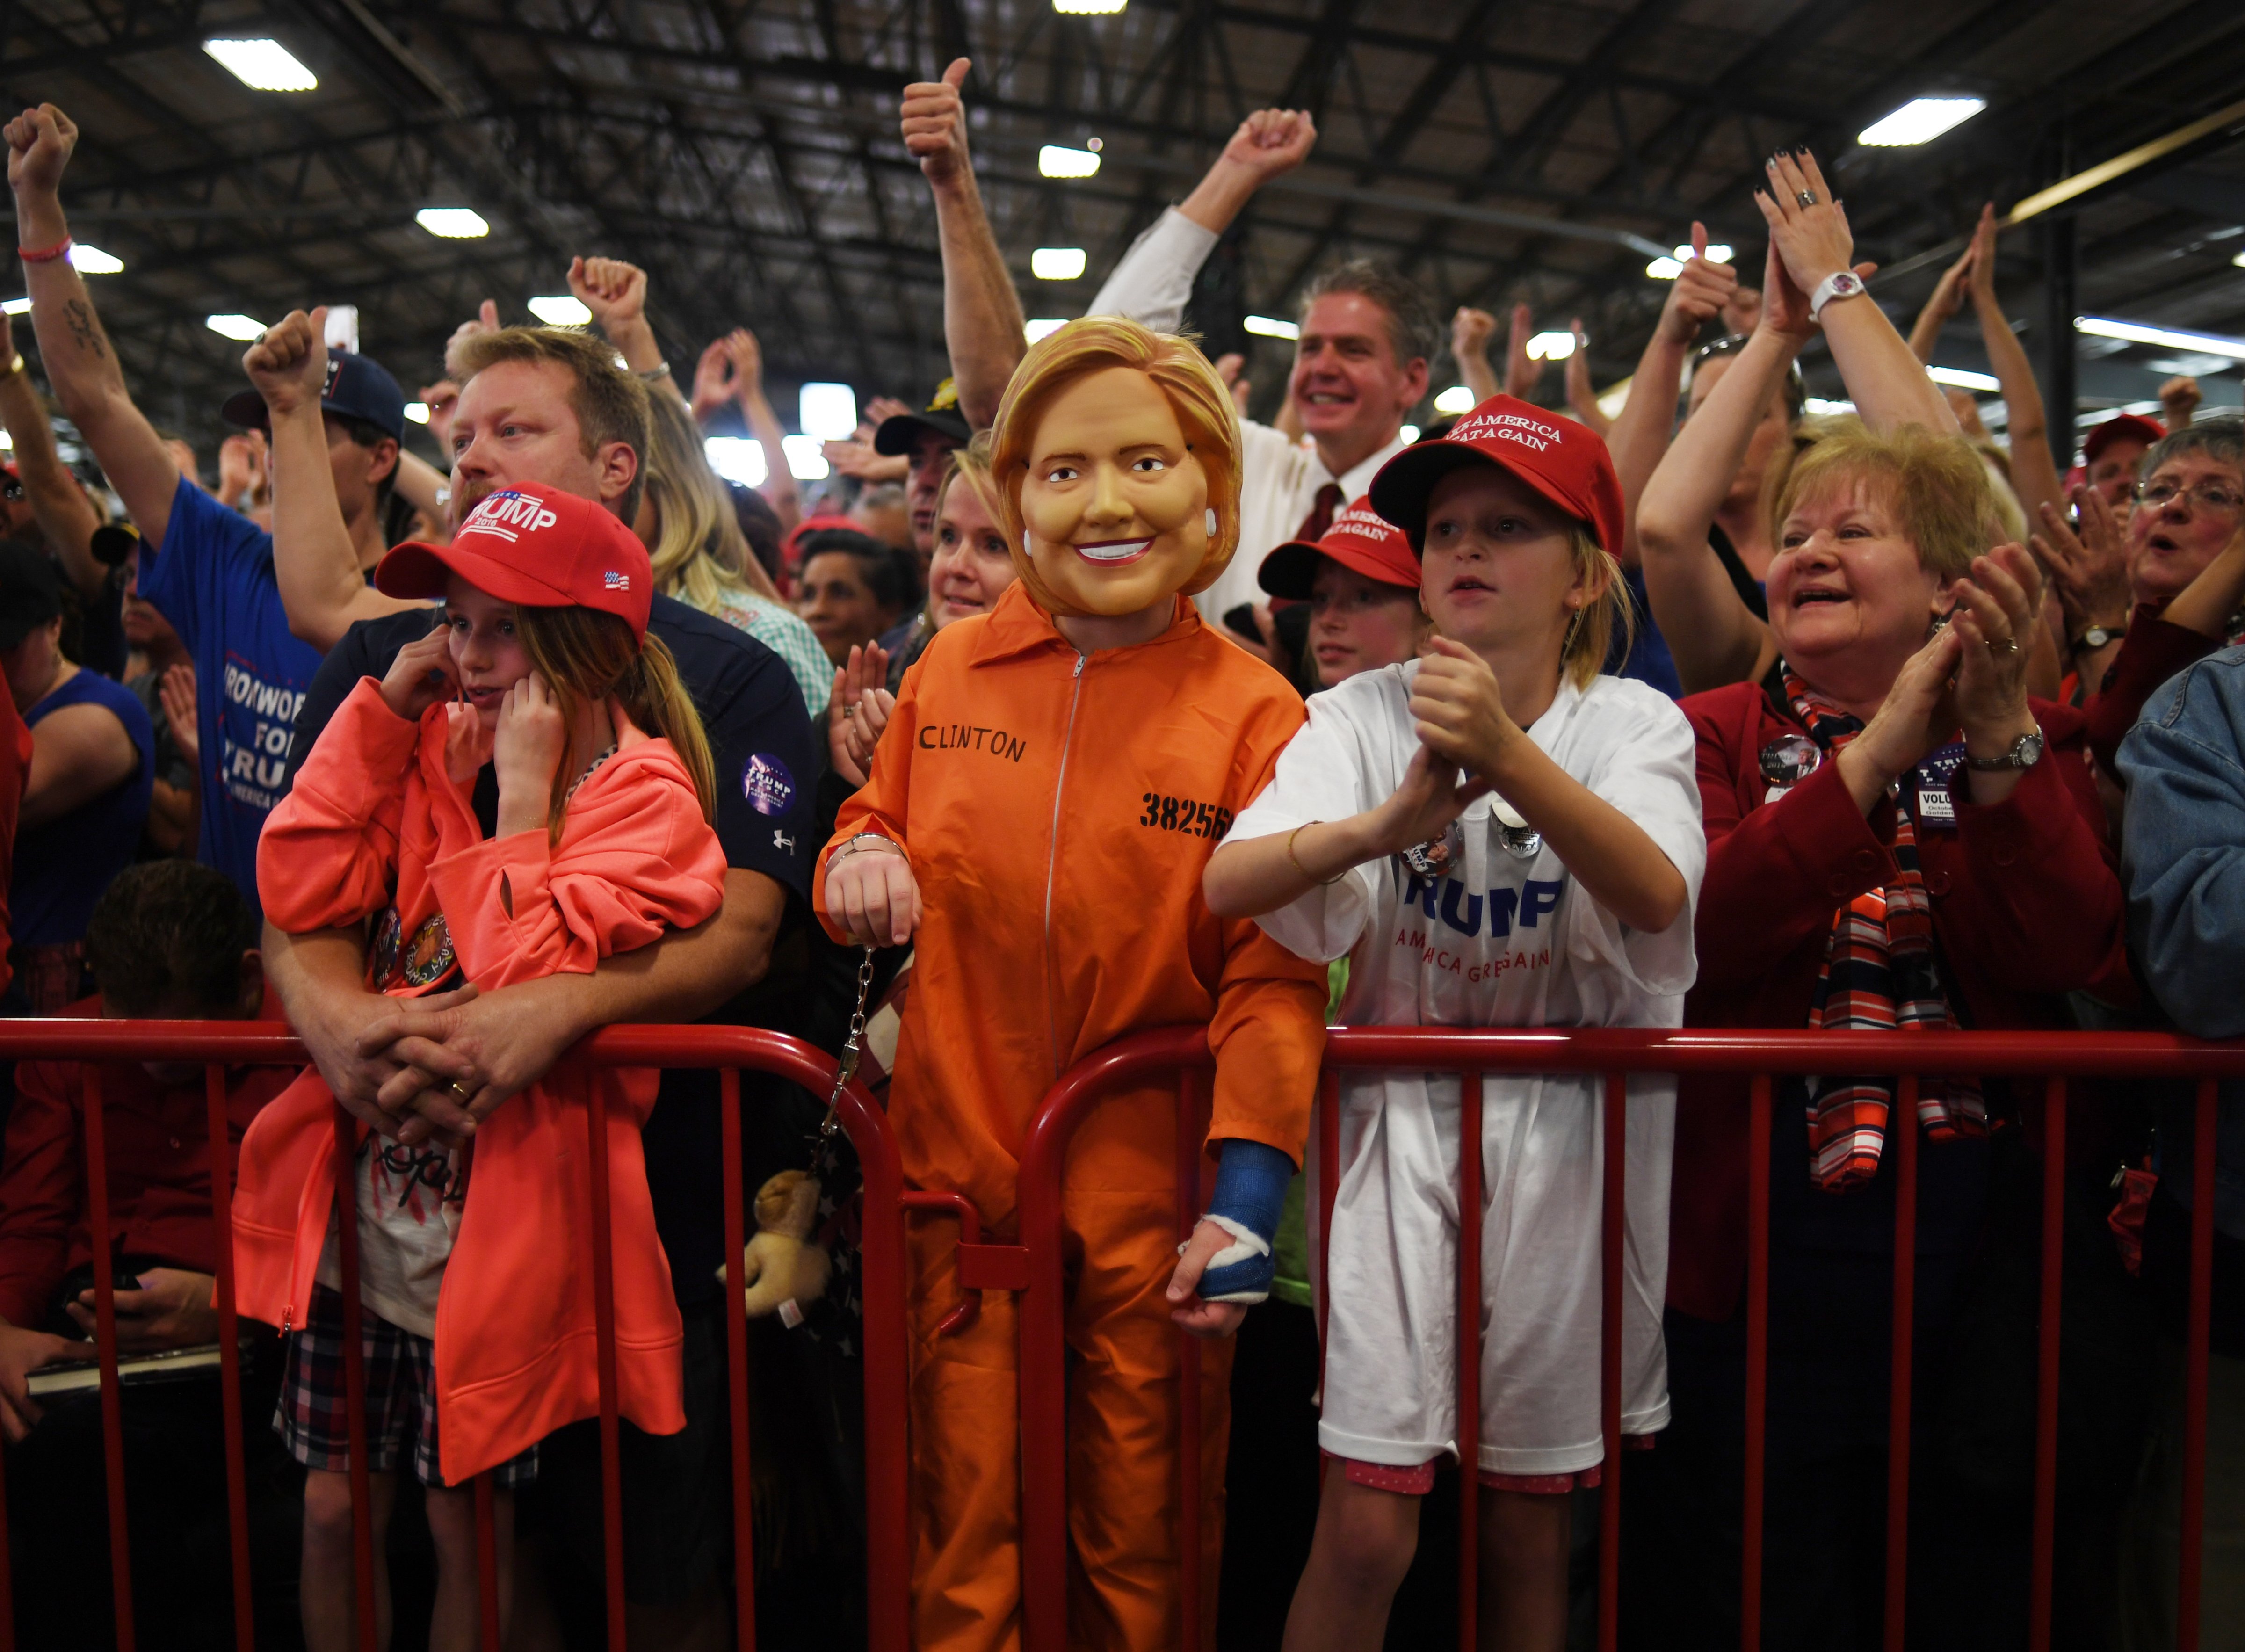 Daniel Lance, 11, dresses as Hillary Clinton in a prison orange jumpsuit during a campaign rally, for Donald J. Trump, at the Jefferson County Fairgrounds in Golden, Oct. 29, 2016. (RJ Sangosti—Denver Post via Getty Images)